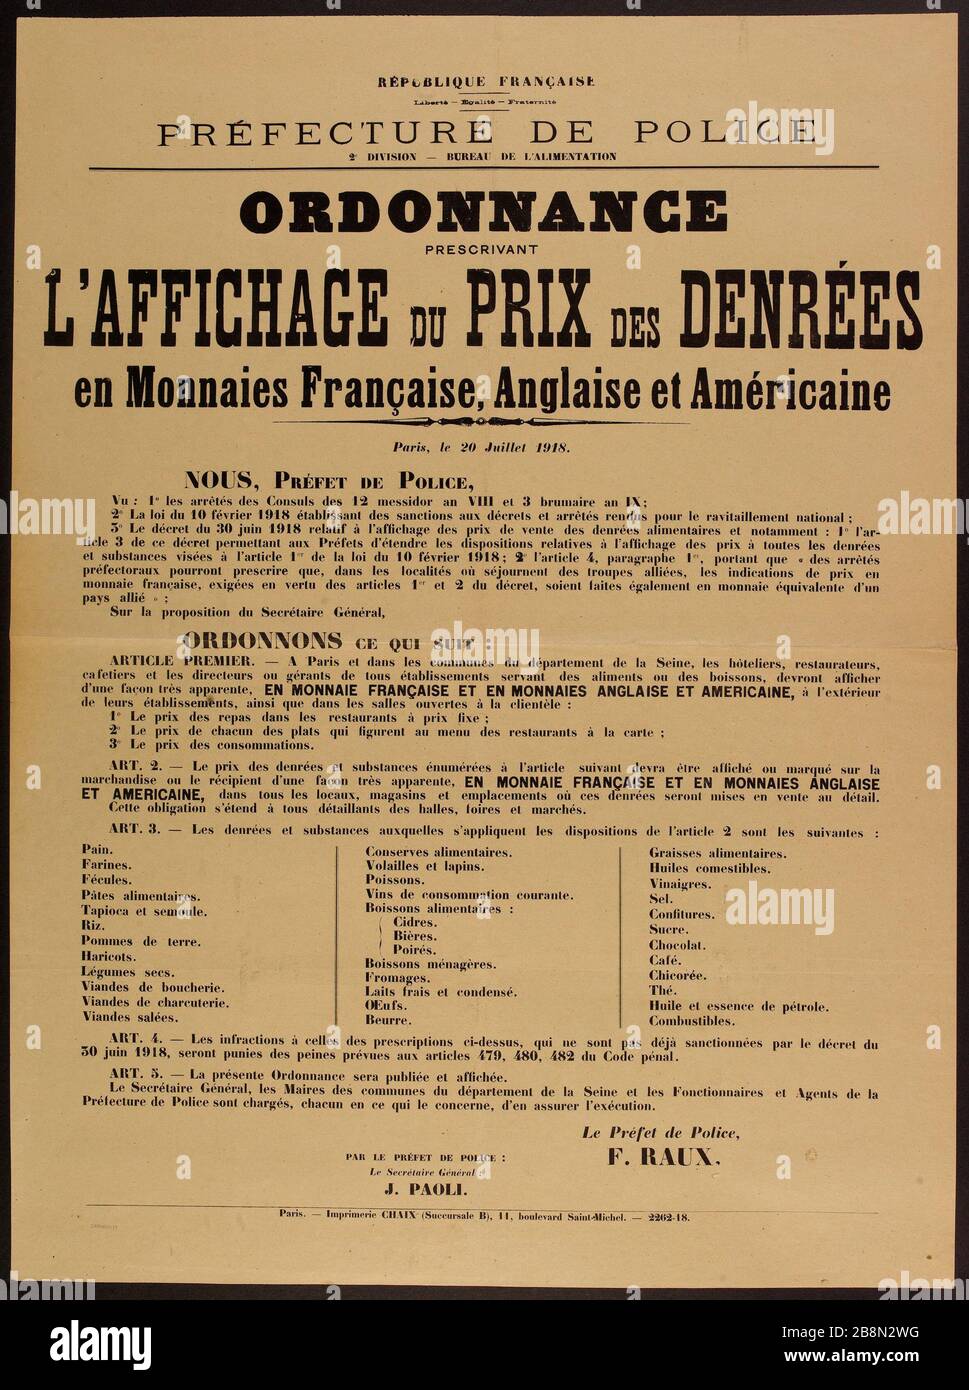 FRENCH REPUBLIC, Freedom - Egalité- Brotherhood prefecture POLICE DIVISION  2 - OFFICE SUPPLY, ORDER REQUIRING THE DISPLAY OF THE PRICE OF FOOD coins  French, English and American Affiche d'information. "Ordonnance prescrivant  l'affichage